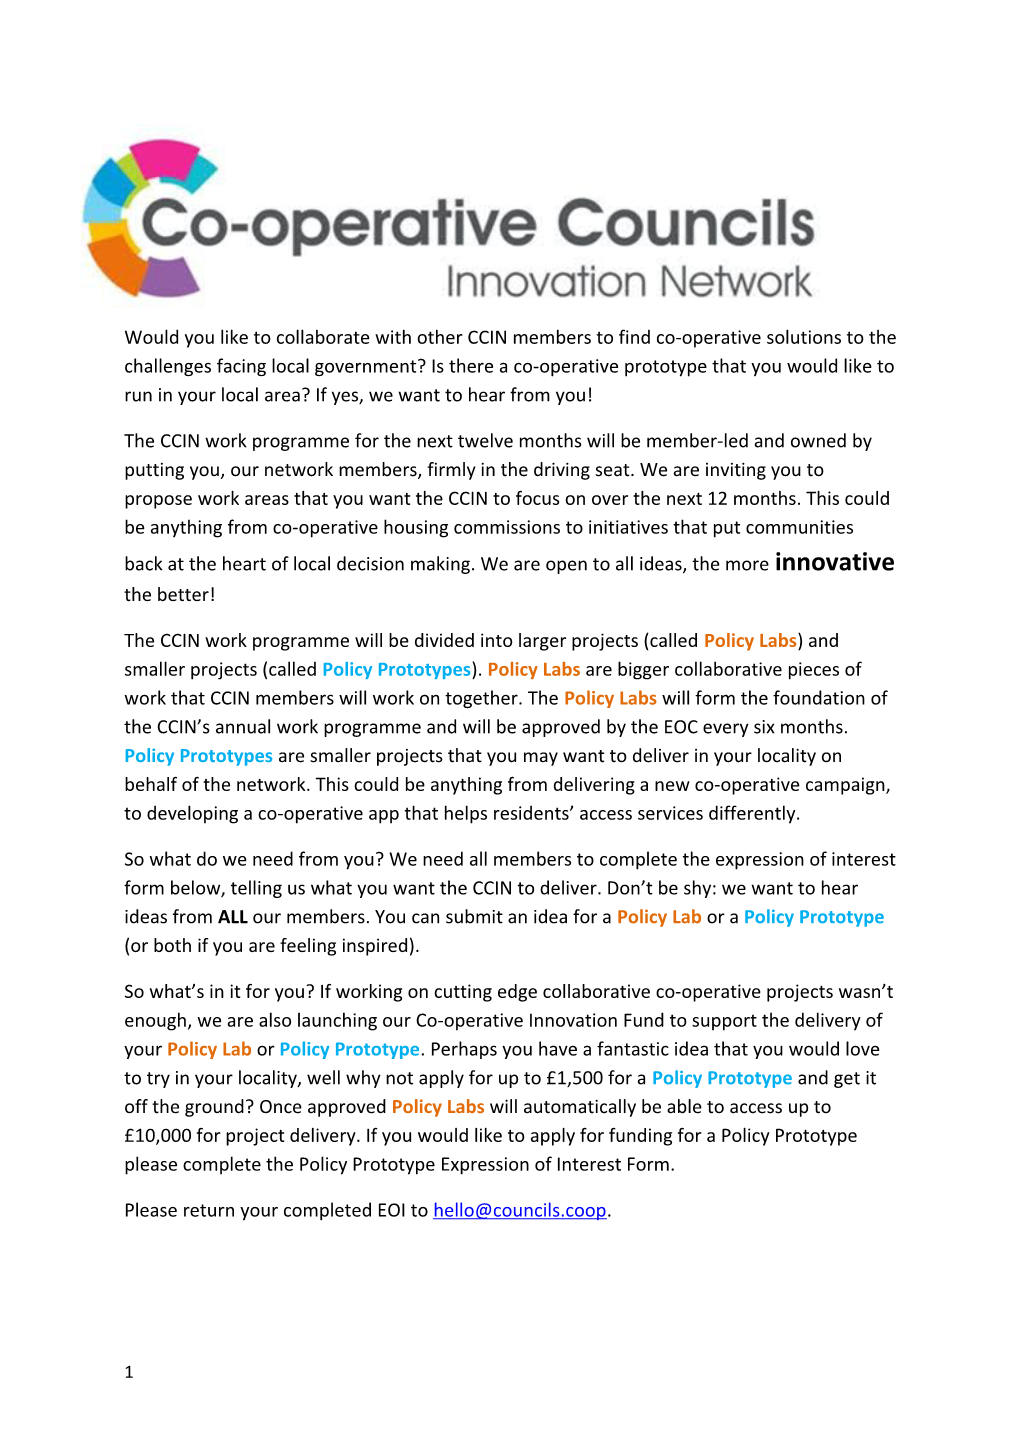 Would You Like to Collaborate with Other CCIN Members to Find Co-Operative Solutions To